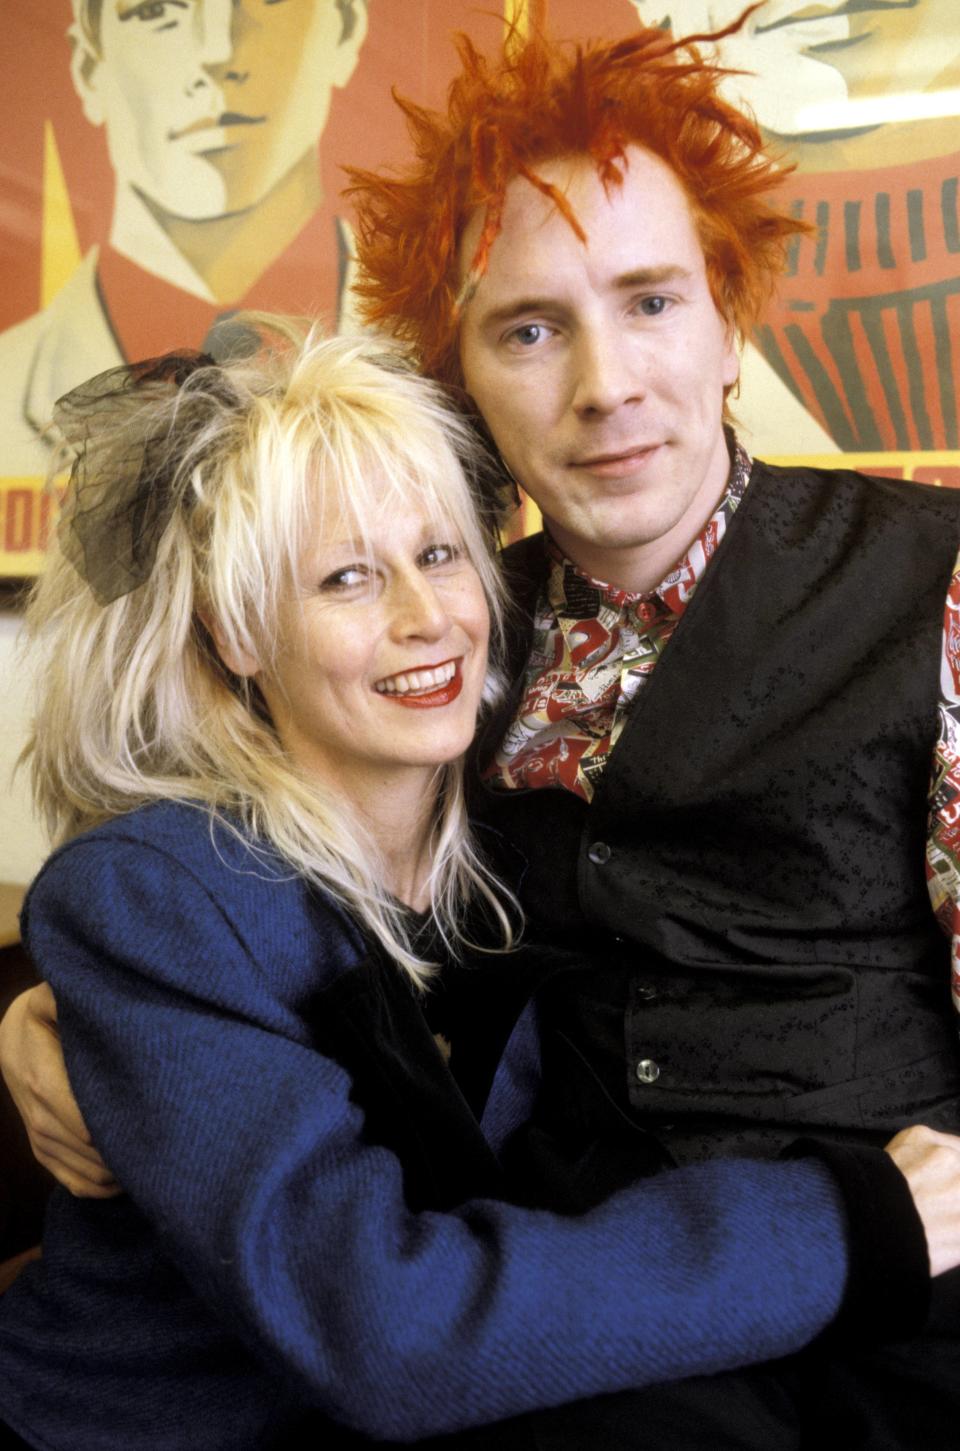 John Lydon posing with his wife Nora Forster. (Photo by Fin Costello/Redferns)